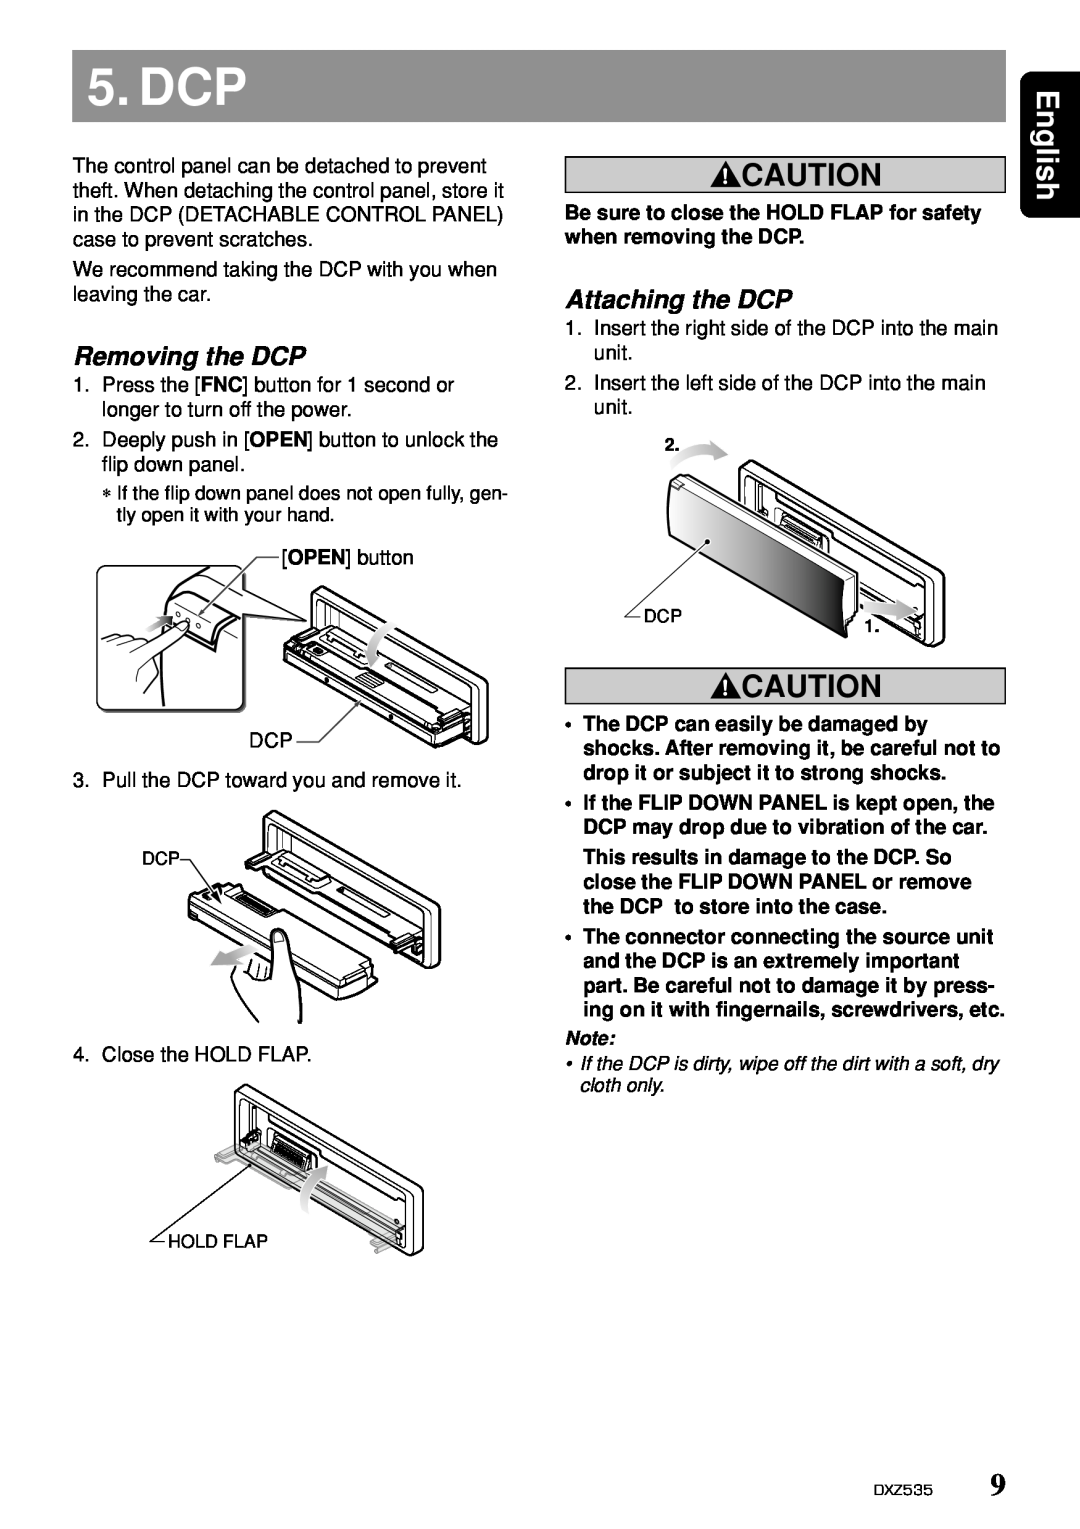 Clarion DXZ535 owner manual Dcp, Removing the DCP, Attaching the DCP, English 